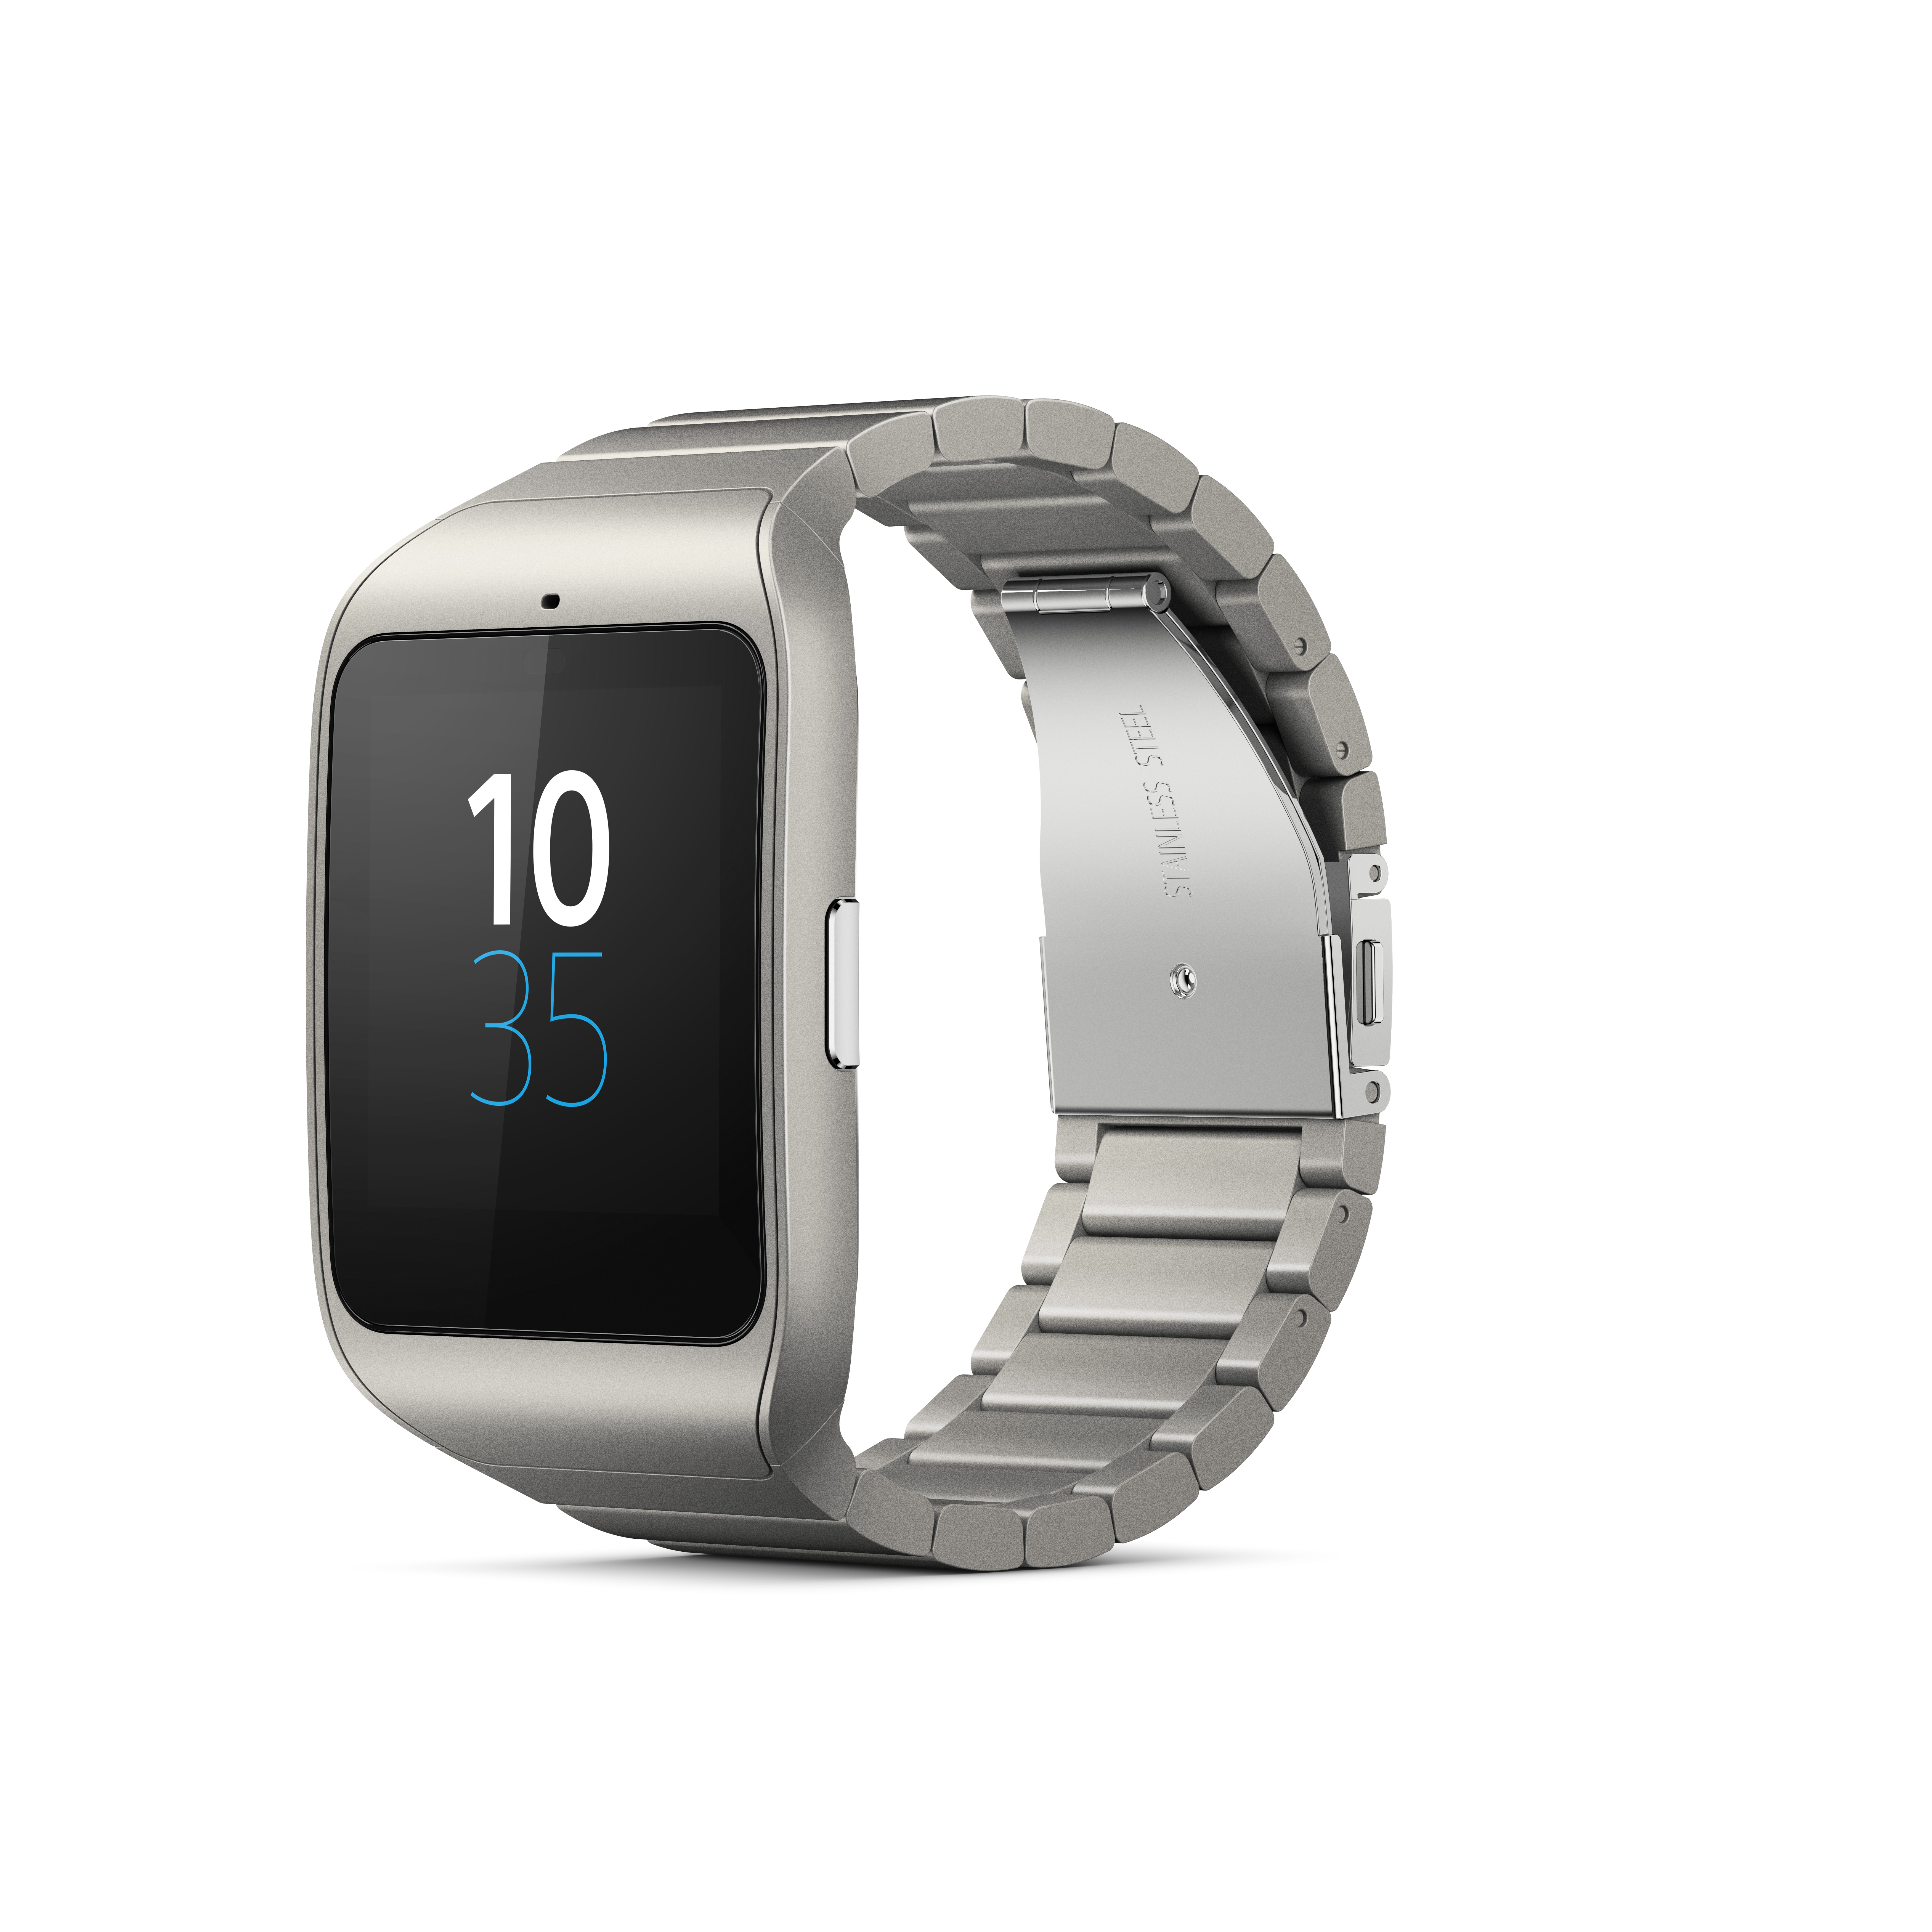 Sony Makes The SmartWatch 3 Slicker, Opens Its Lifelog API And